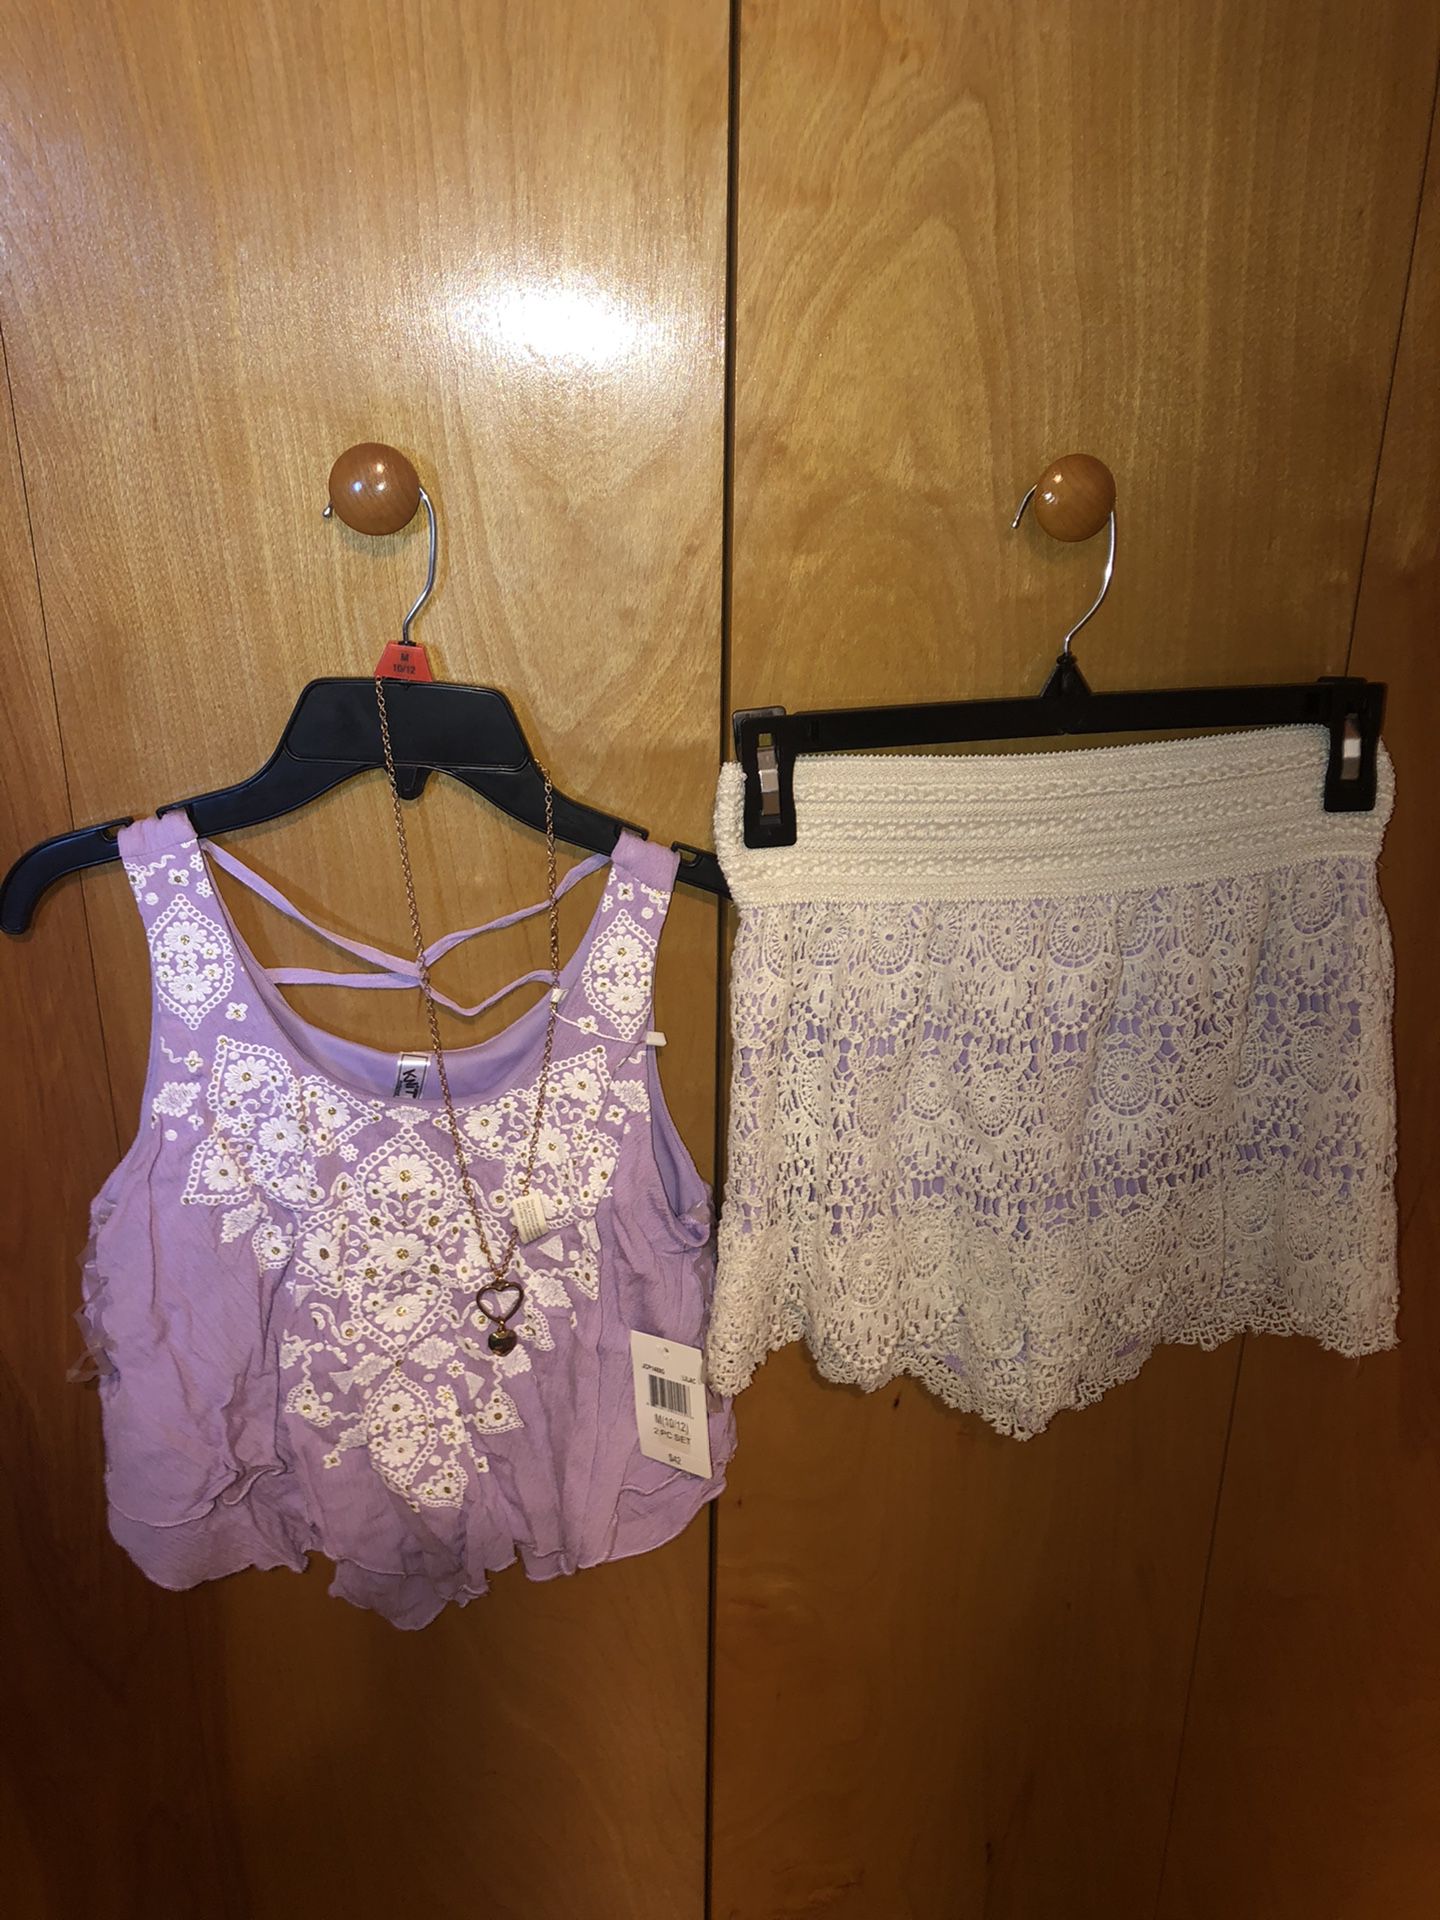 Girls size 10 short set (top and shorts ) new with tags. Originally $42